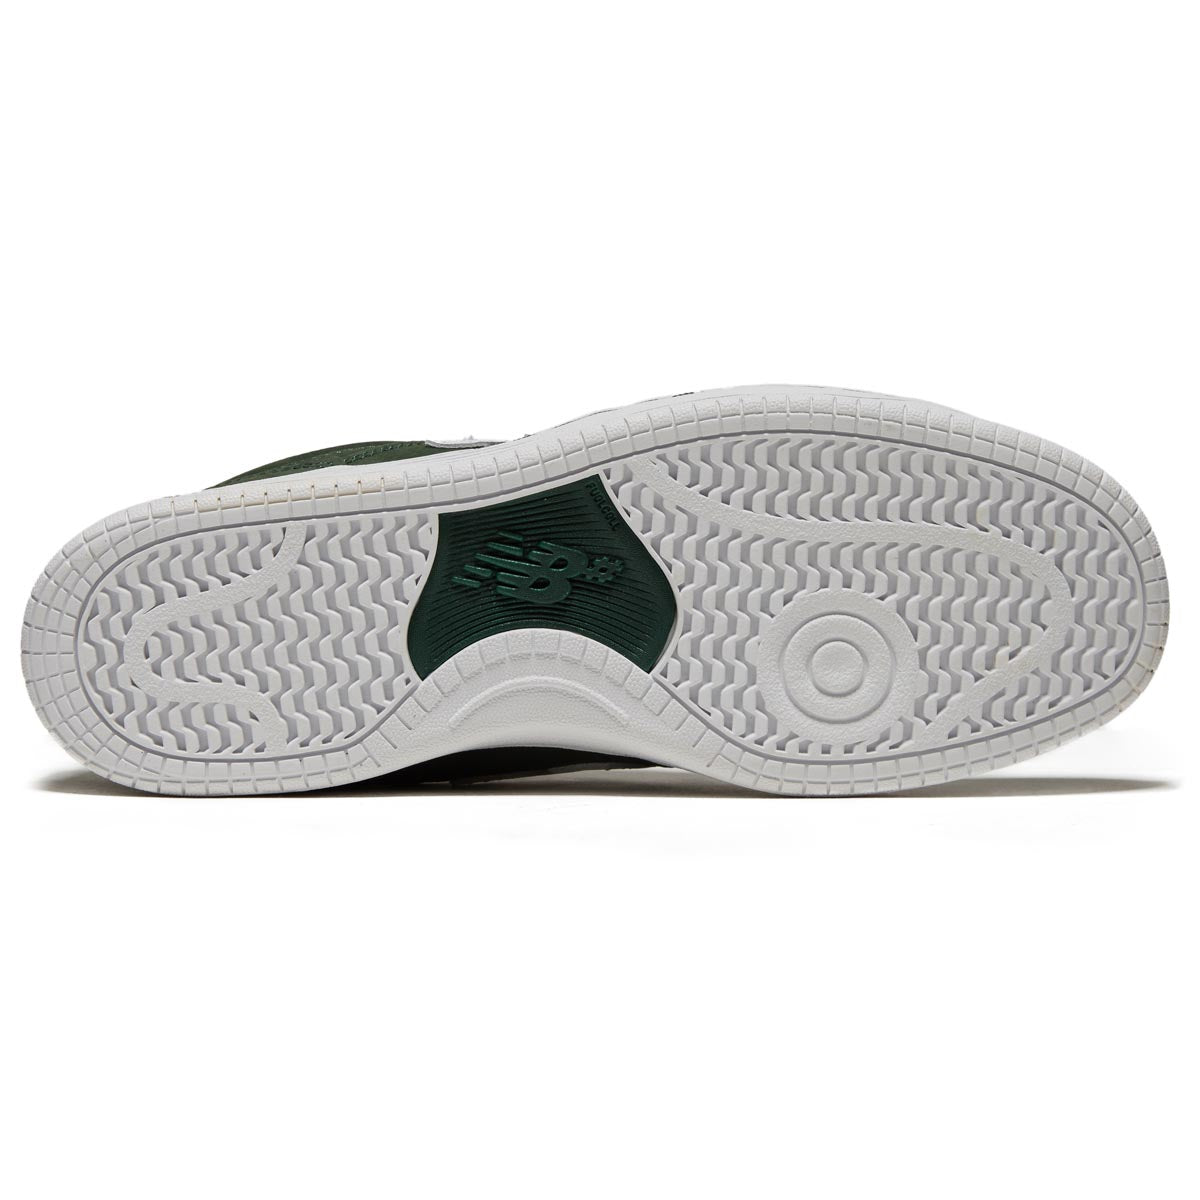 New Balance 480 Shoes - Forest Green/White image 4